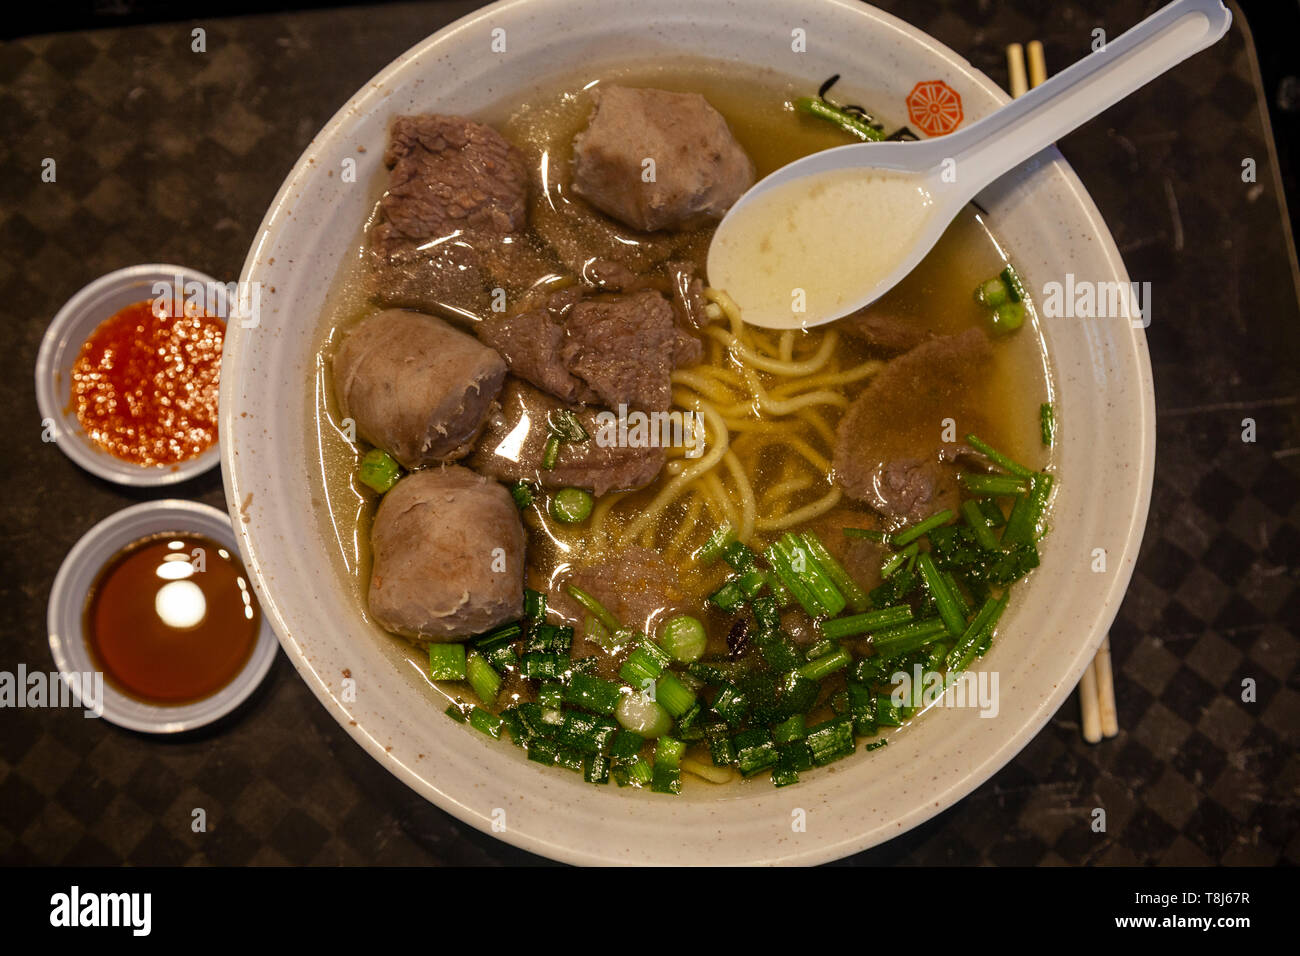 A Typical Singaporean Noodle Dish Served At Lau Pa Sat Food Court, Singapore, South East Asia Stock Photo